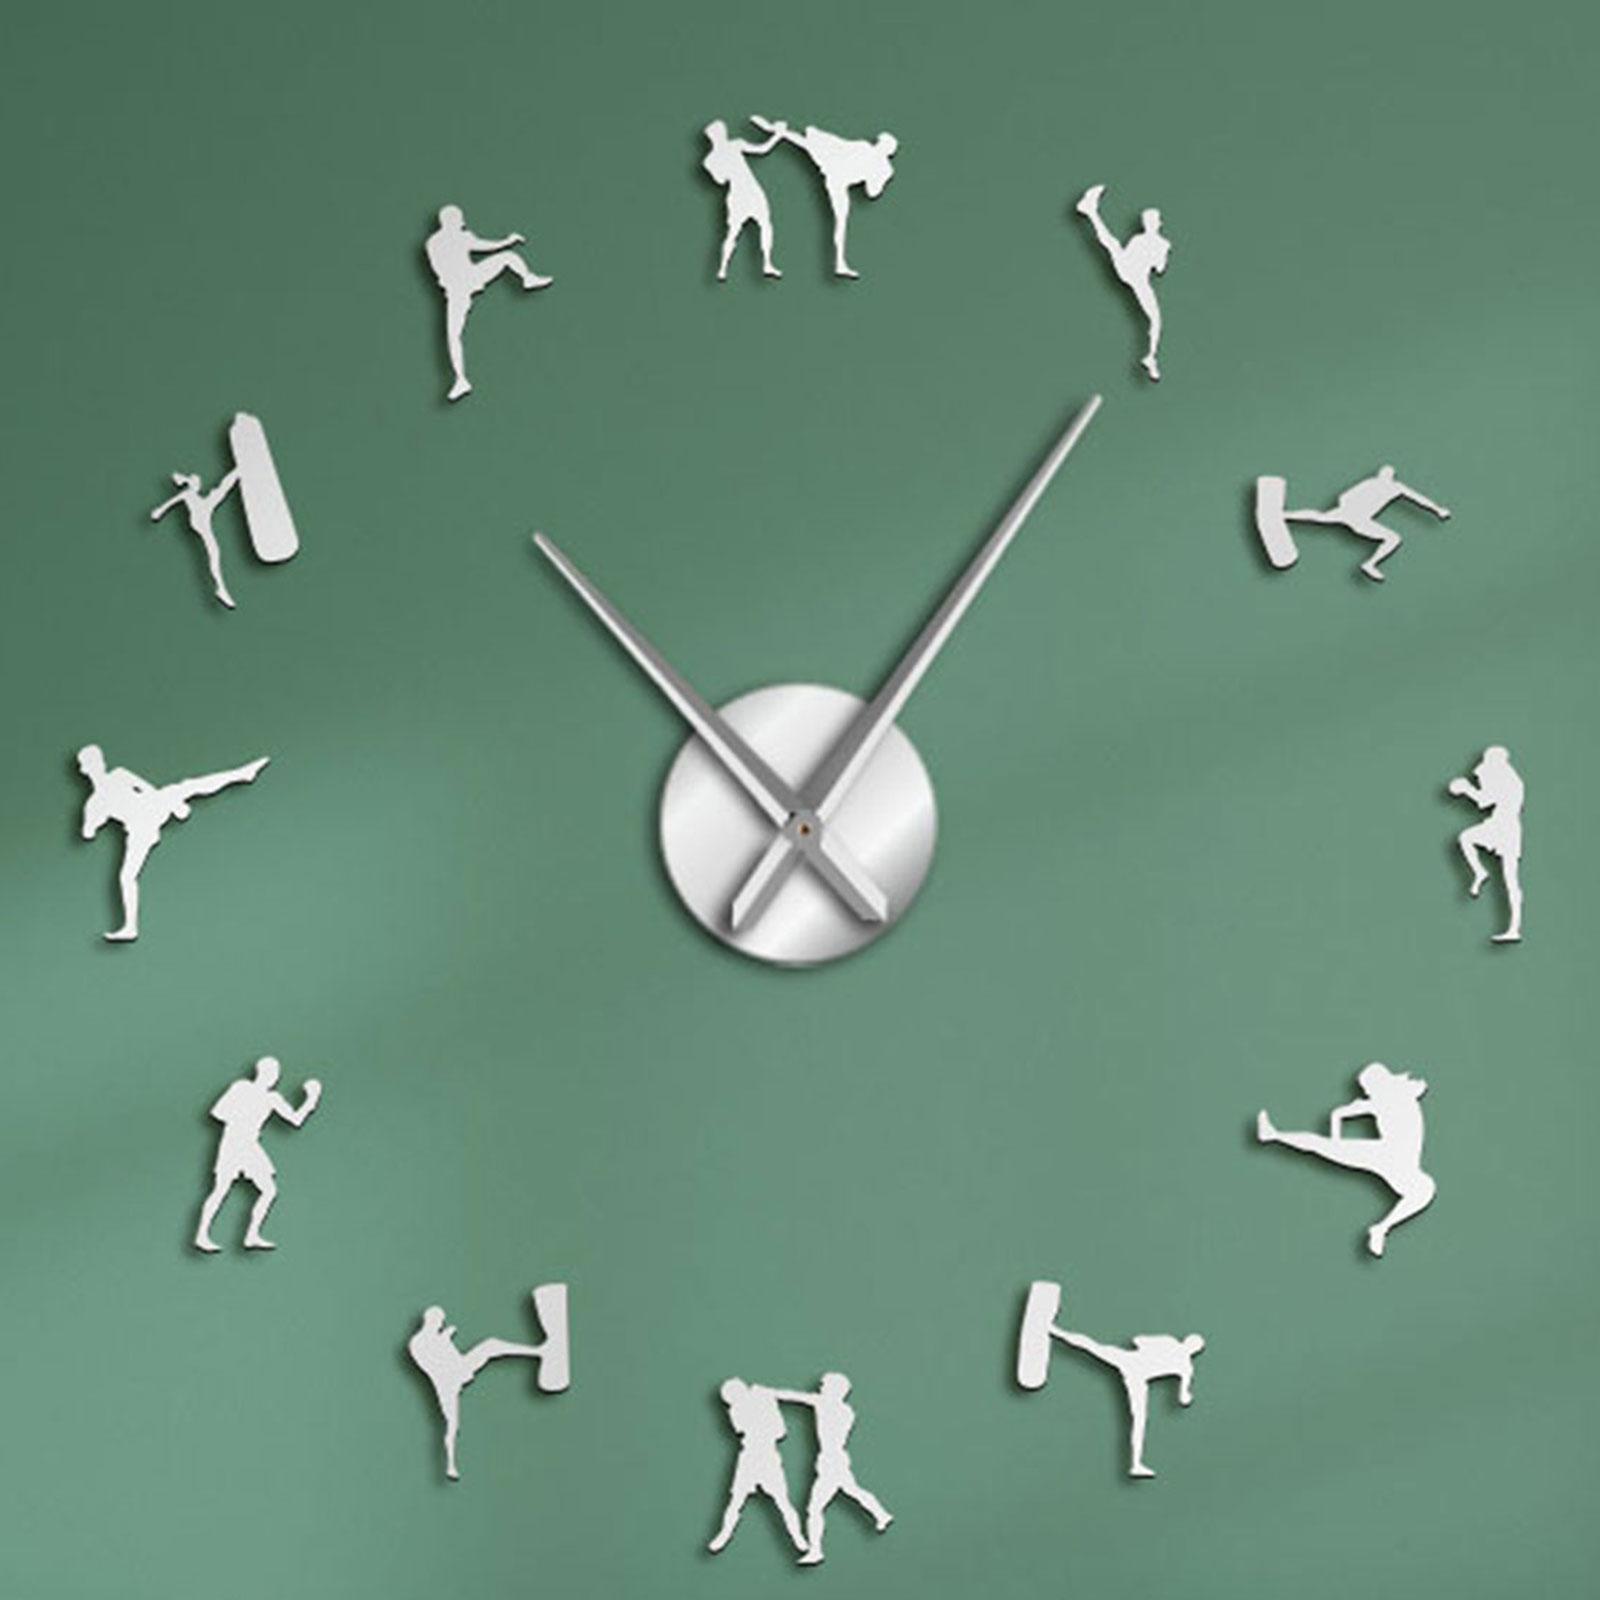 DIY Large 3D Wall Clock Non Ticking for Office Kitchen Home Decoration Argent 37 Inches